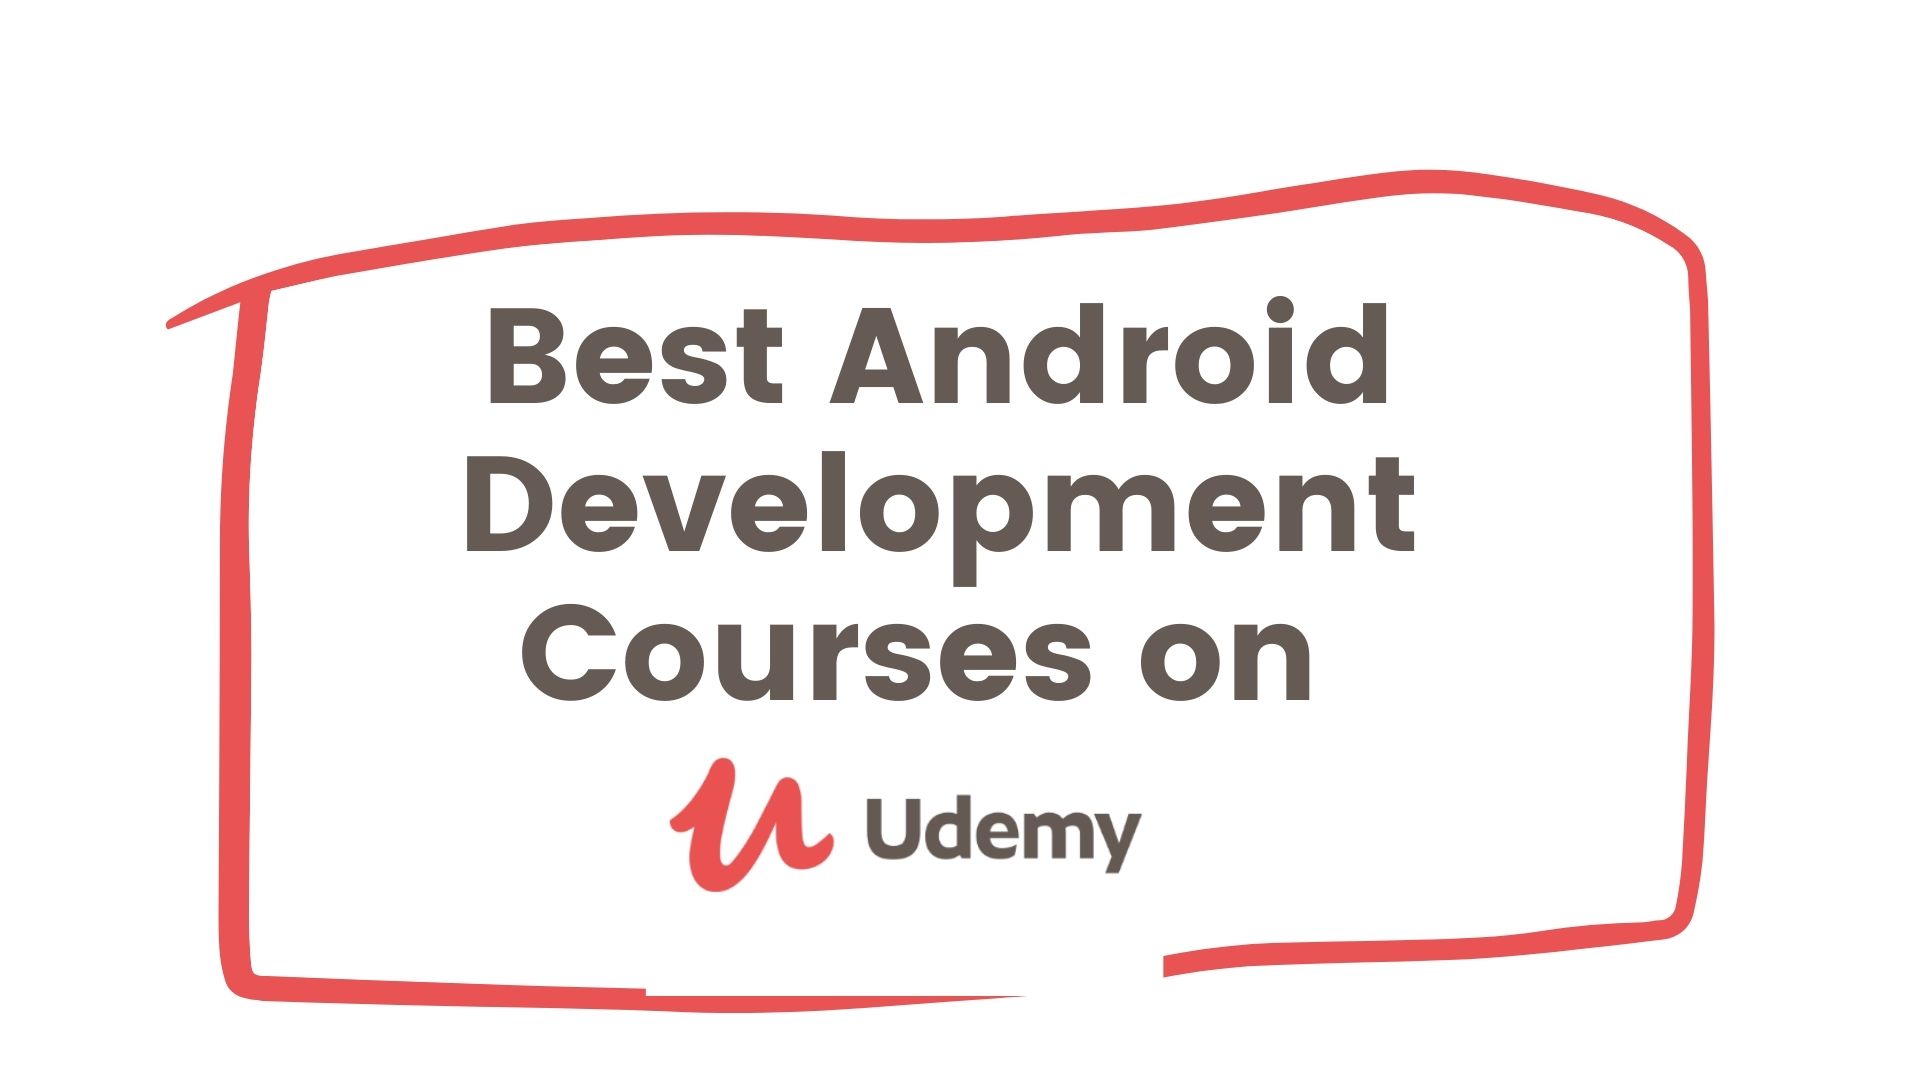 Best Android Development Courses on Udemy